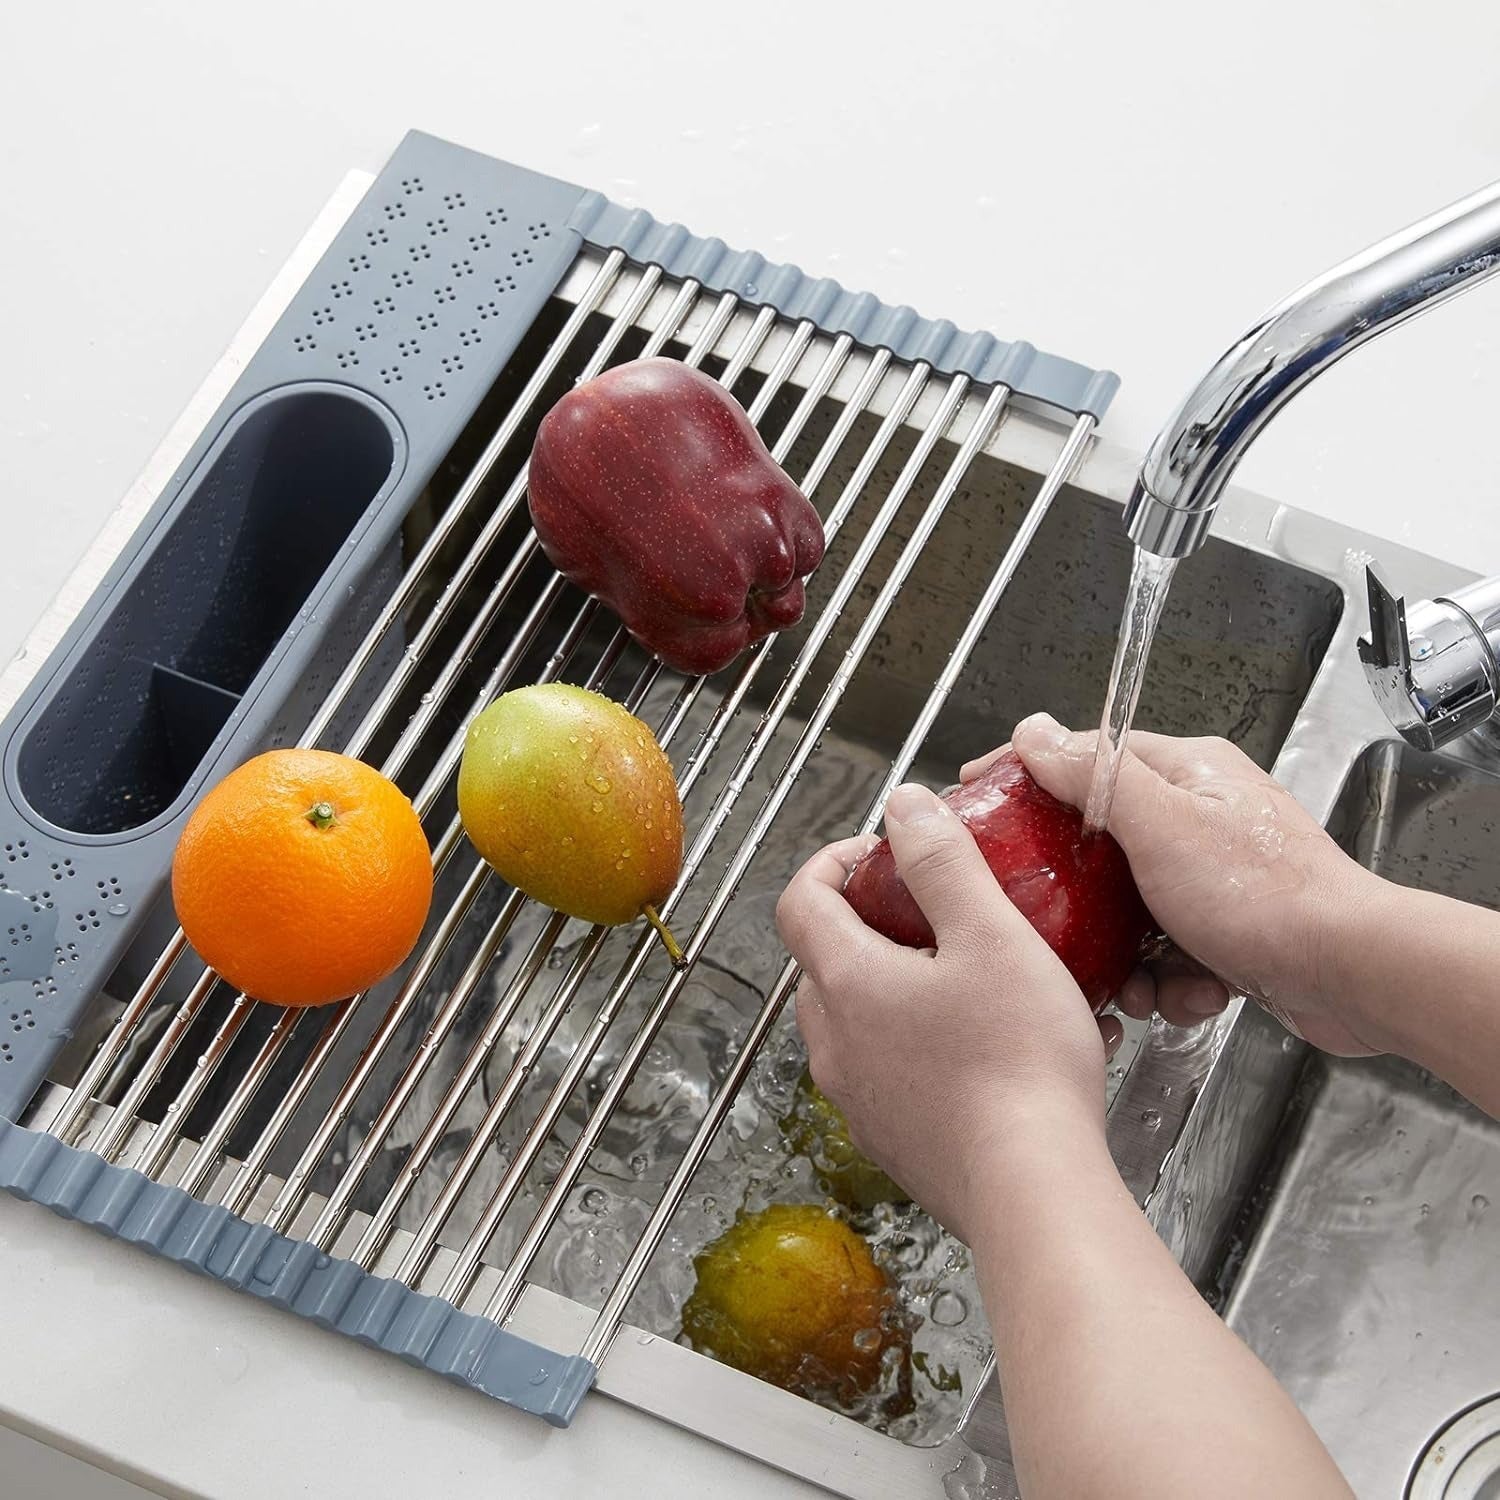 Fruits Placed on Dish Drainer to Dry.